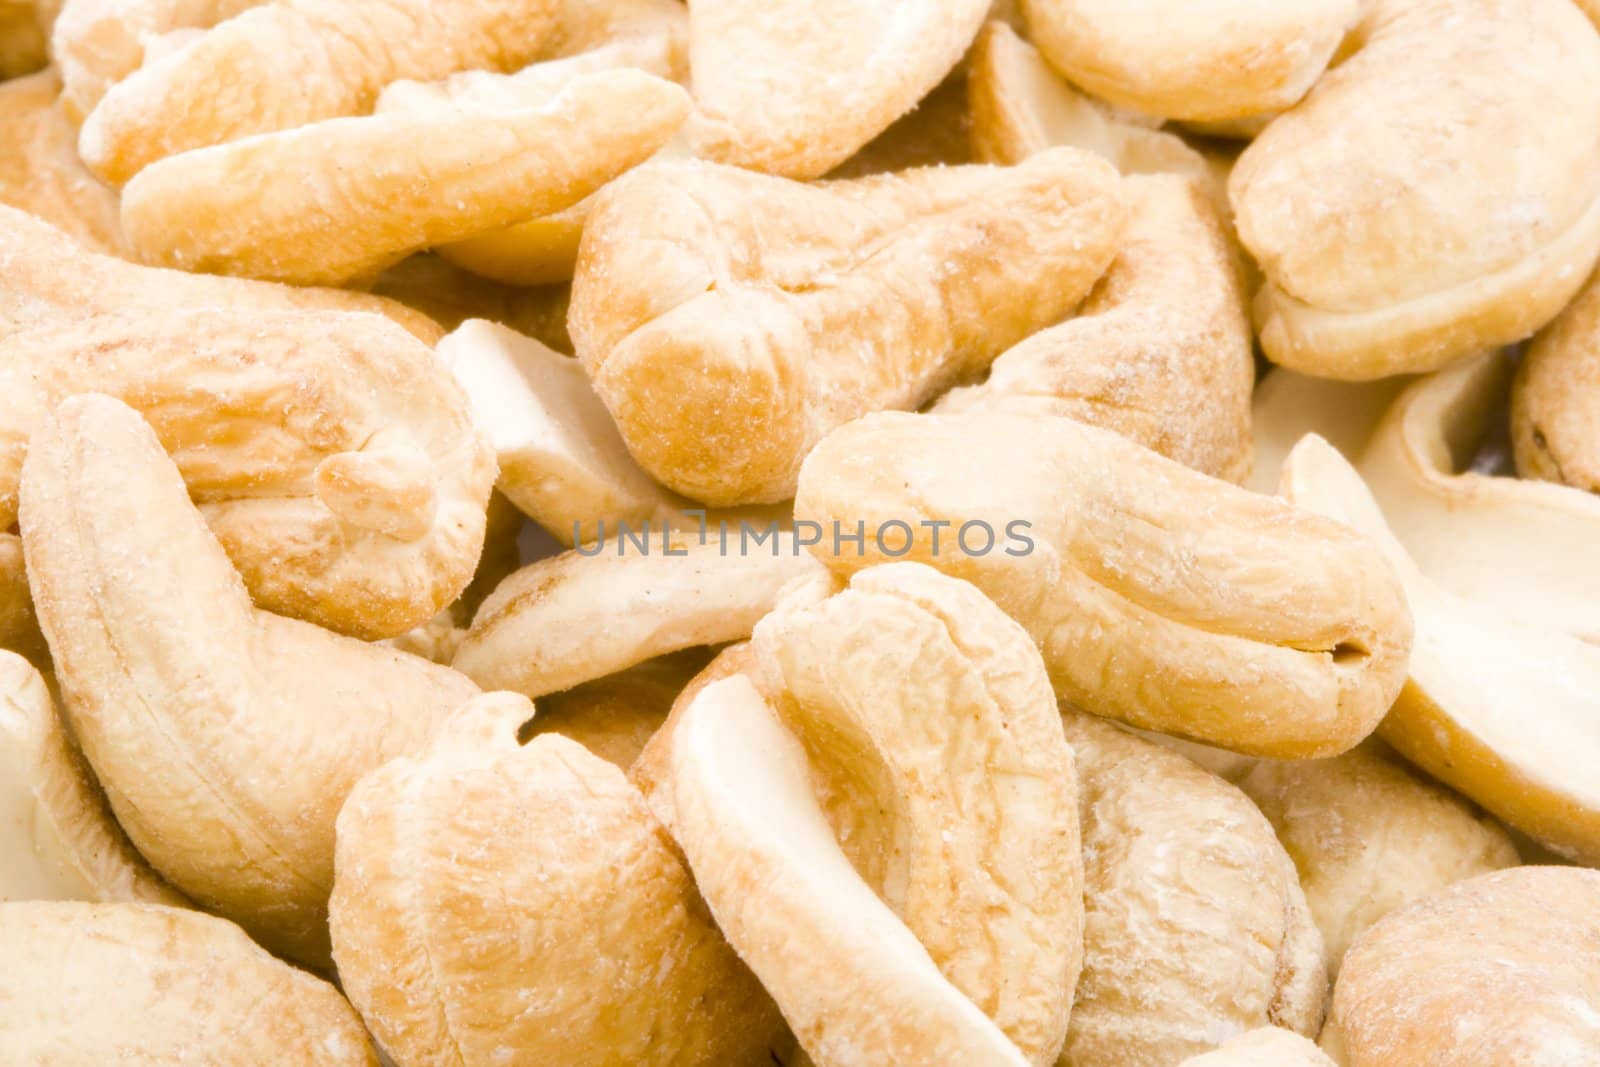 A close-up of a group of cashew nuts.